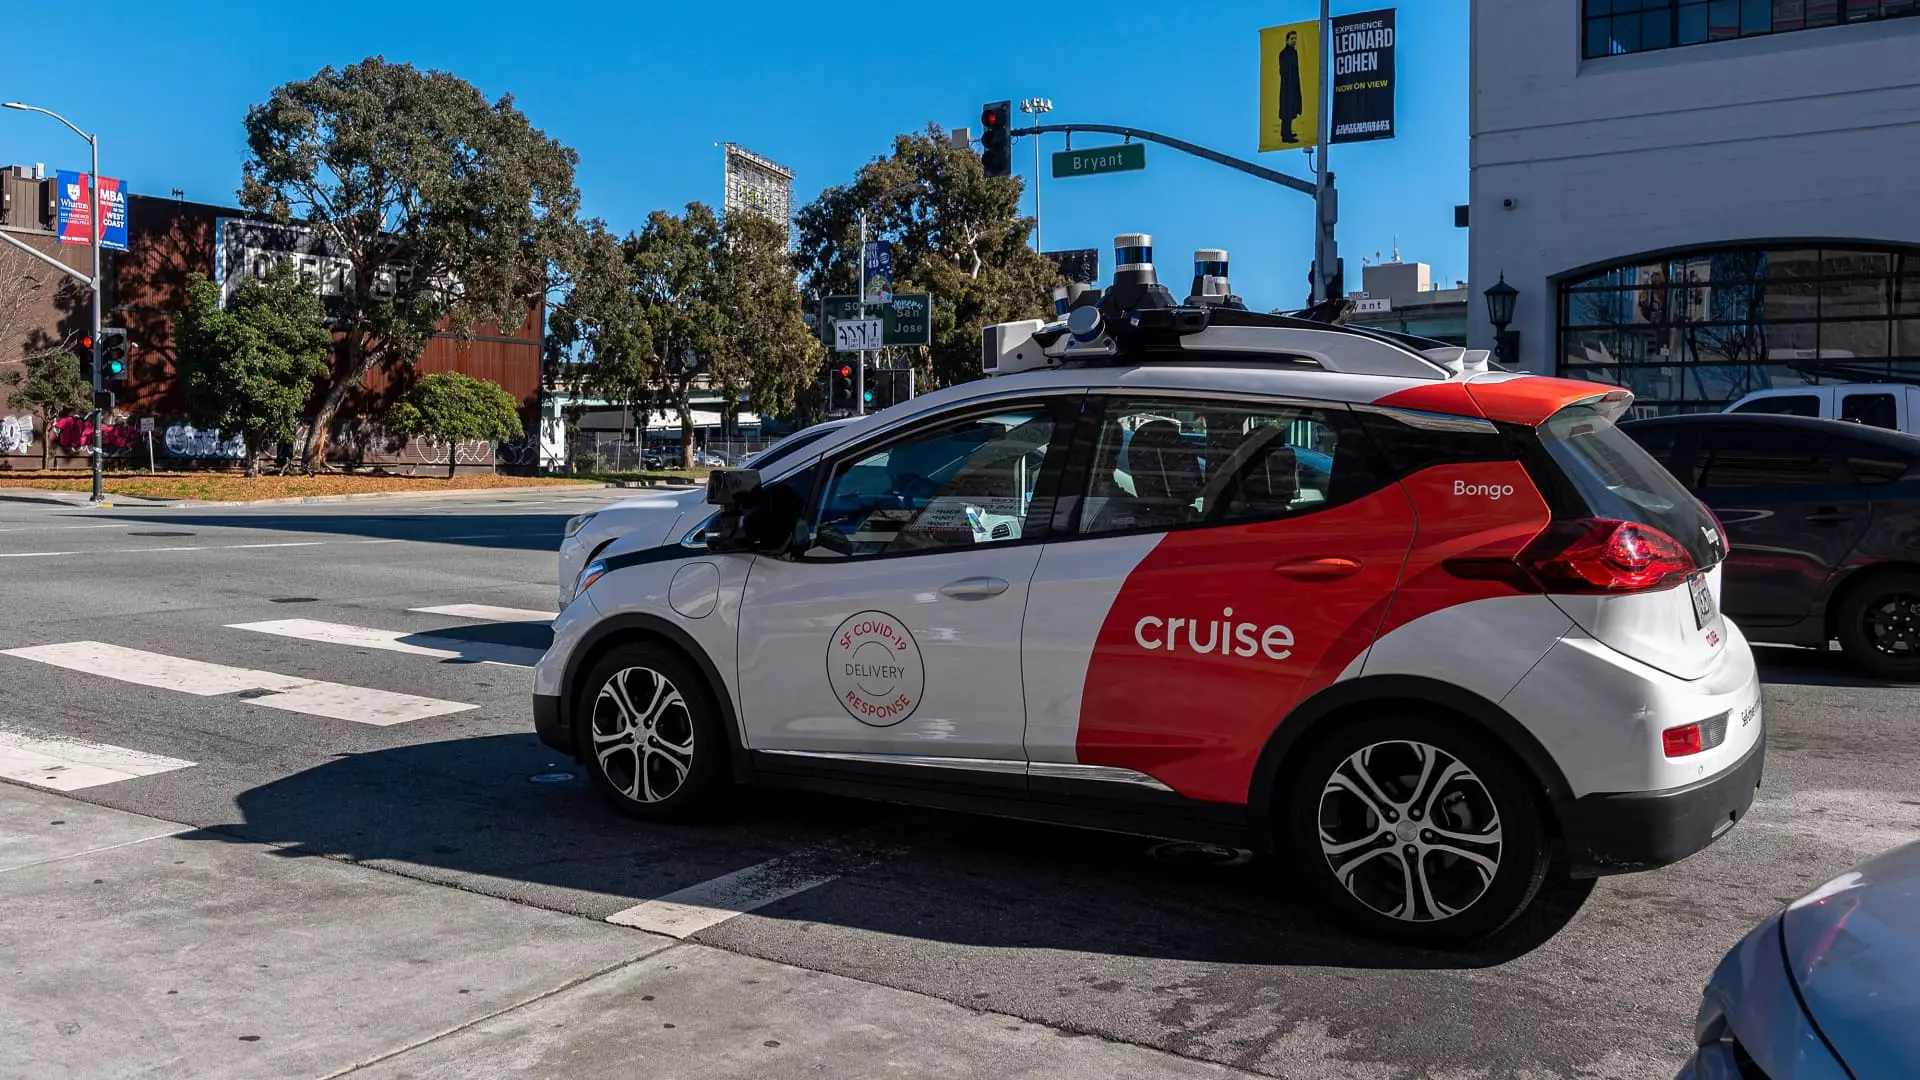 The Downfall of Cruise: Layoffs and Safety Concerns Rock the Robotaxi Startup